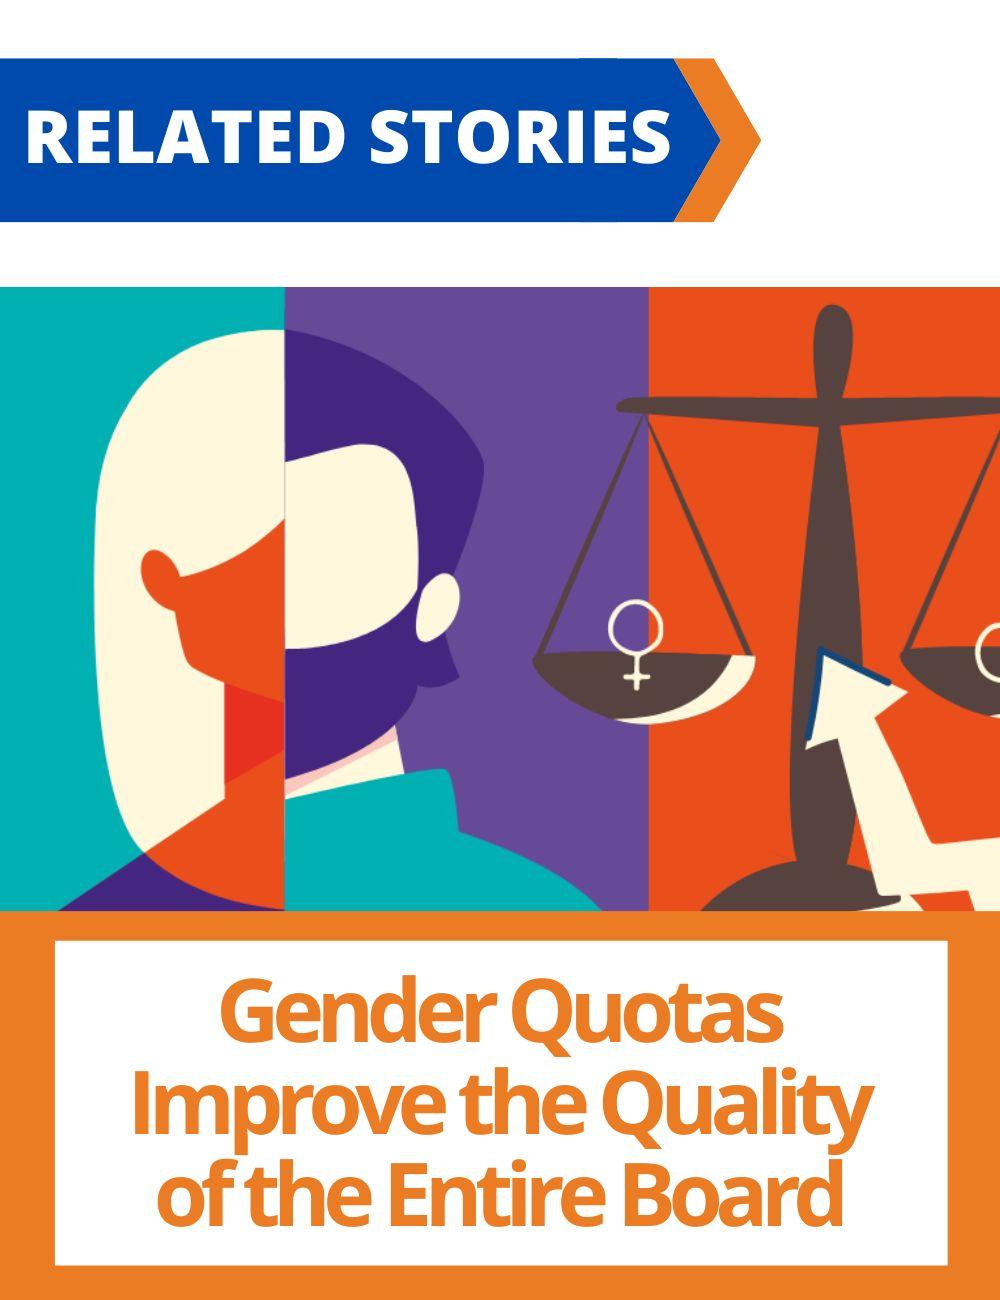 Link to related stories. Image: elements that recall gender quotas. Story headline: Gender Quotas Improve the Quality of the Entire Board